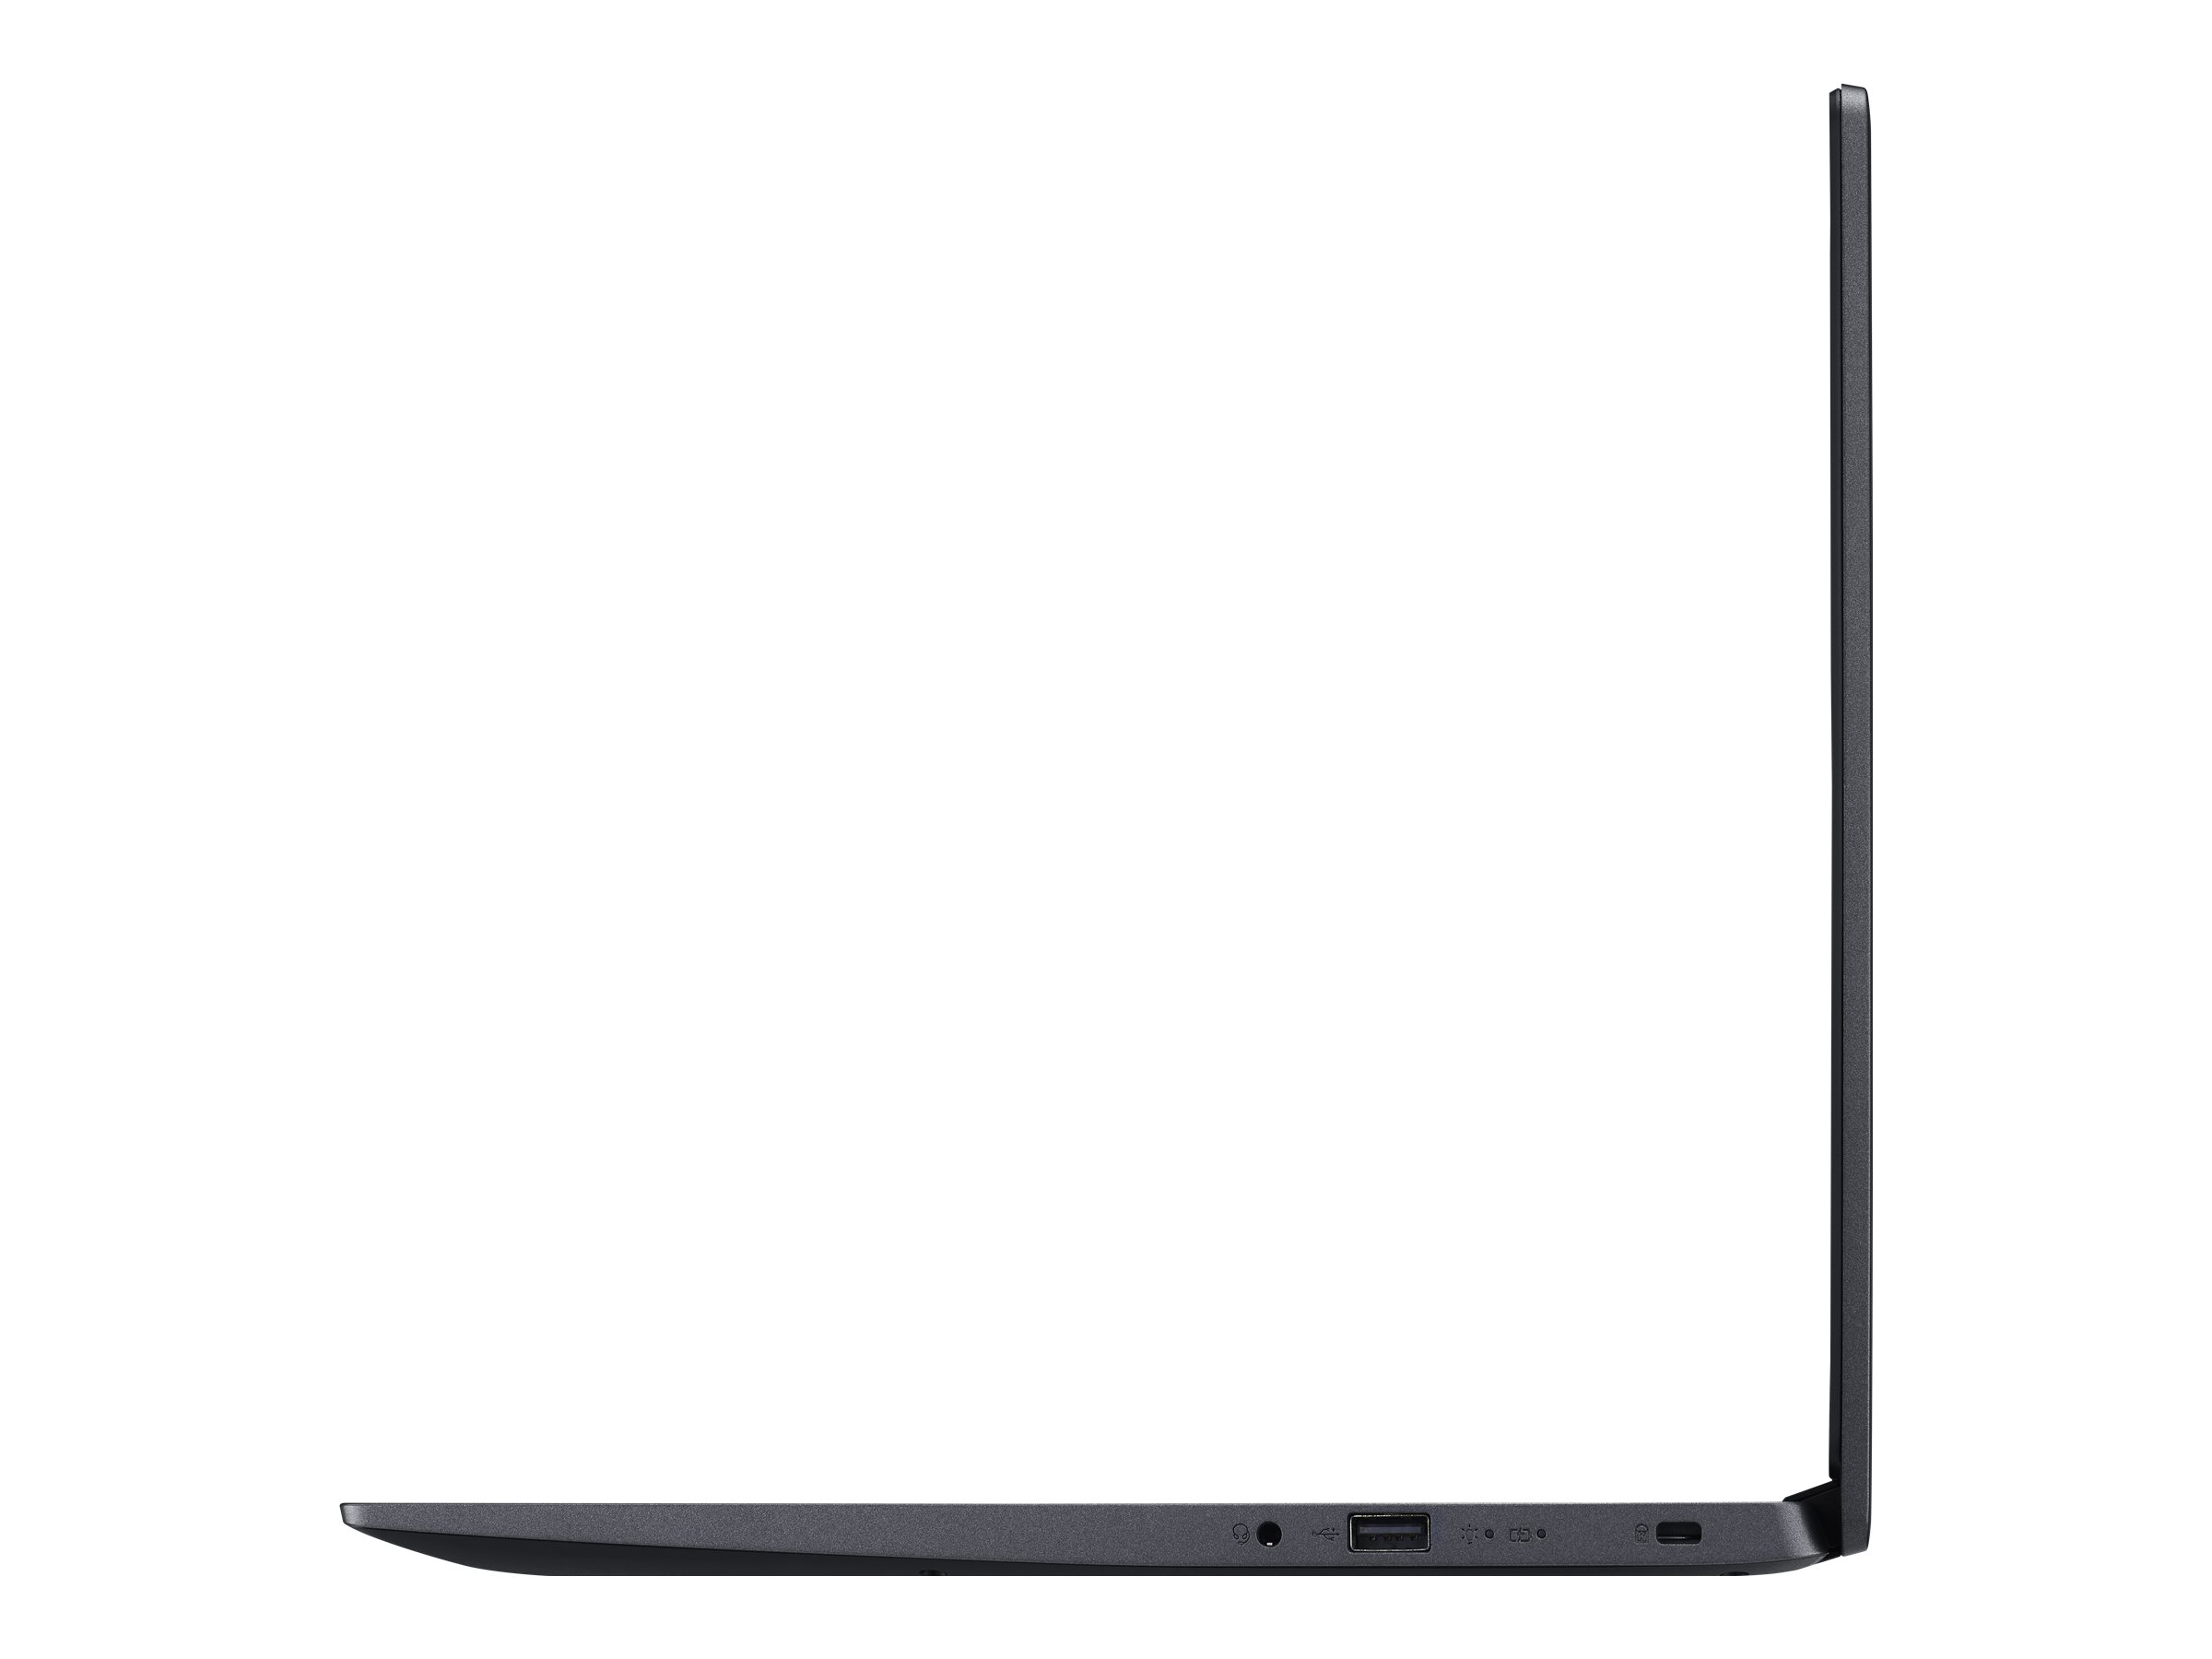 Restored Acer Aspire 1 A115-31-C2Y3, 15.6" Full HD Display, Intel Celeron N4020, 4GB DDR4, 64GB eMMC, 802.11ac Wi-Fi 5, Up to 10-Hours of Battery Life, Windows 10 in S mode, Black (Refurbished) - image 4 of 4